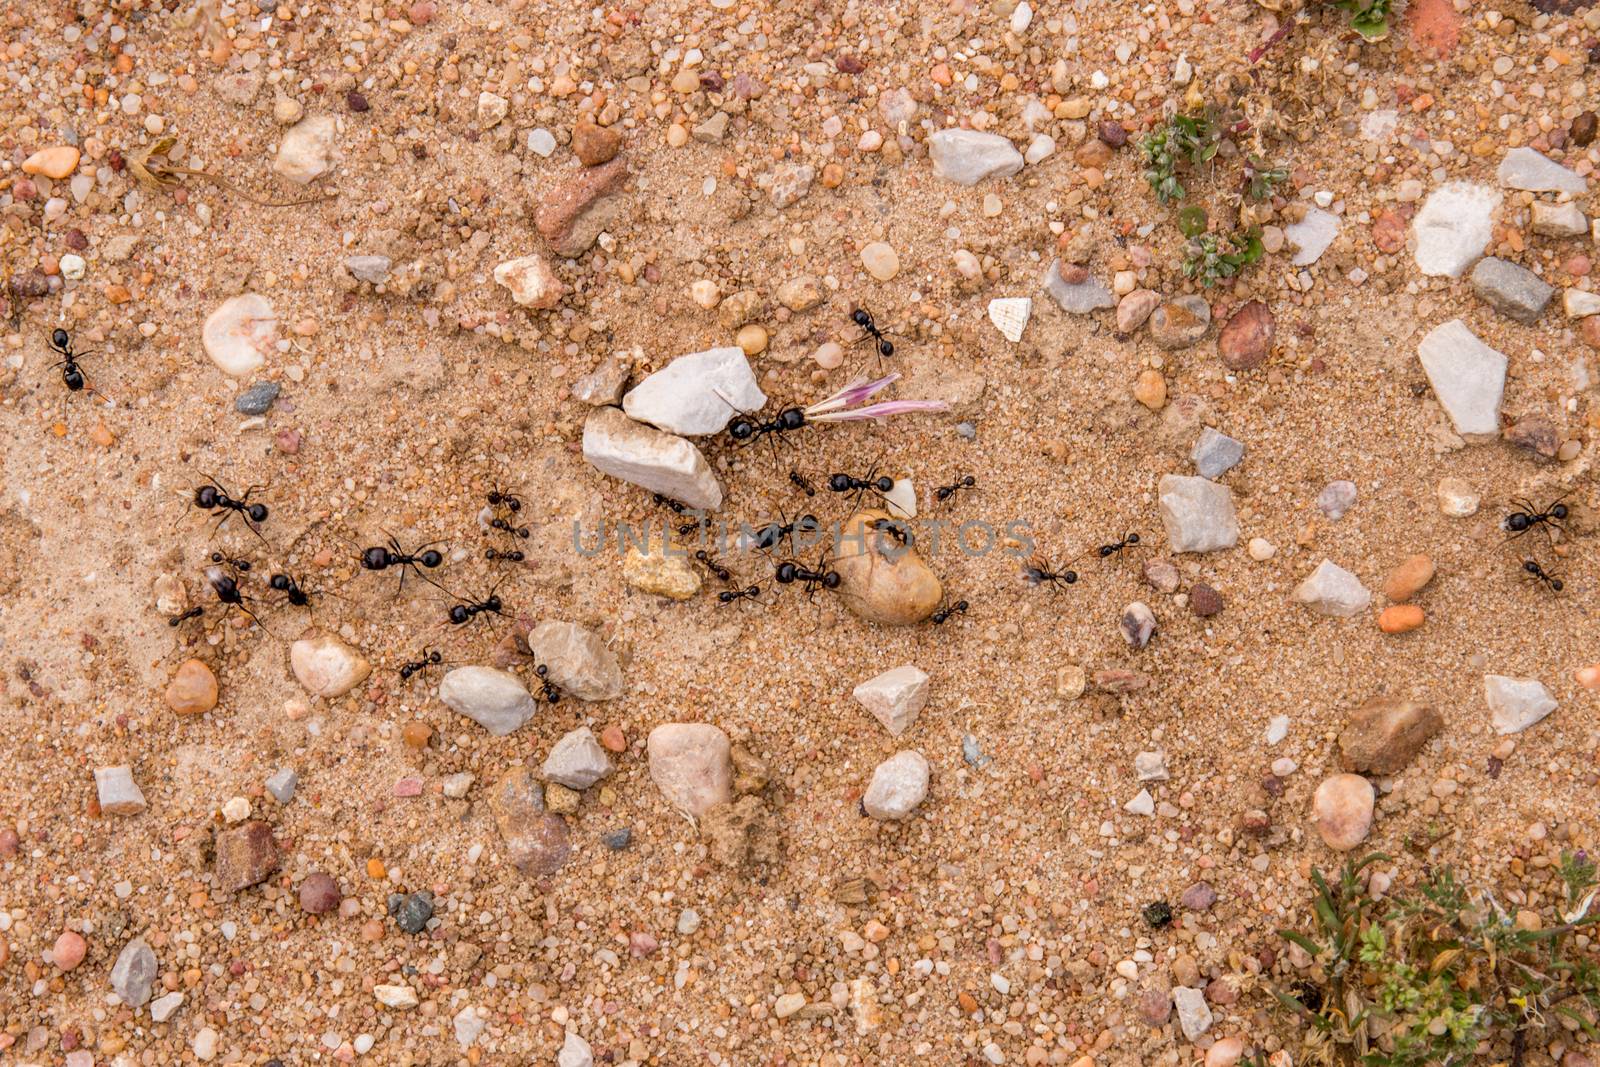 Black ants creating a path to the burrow.